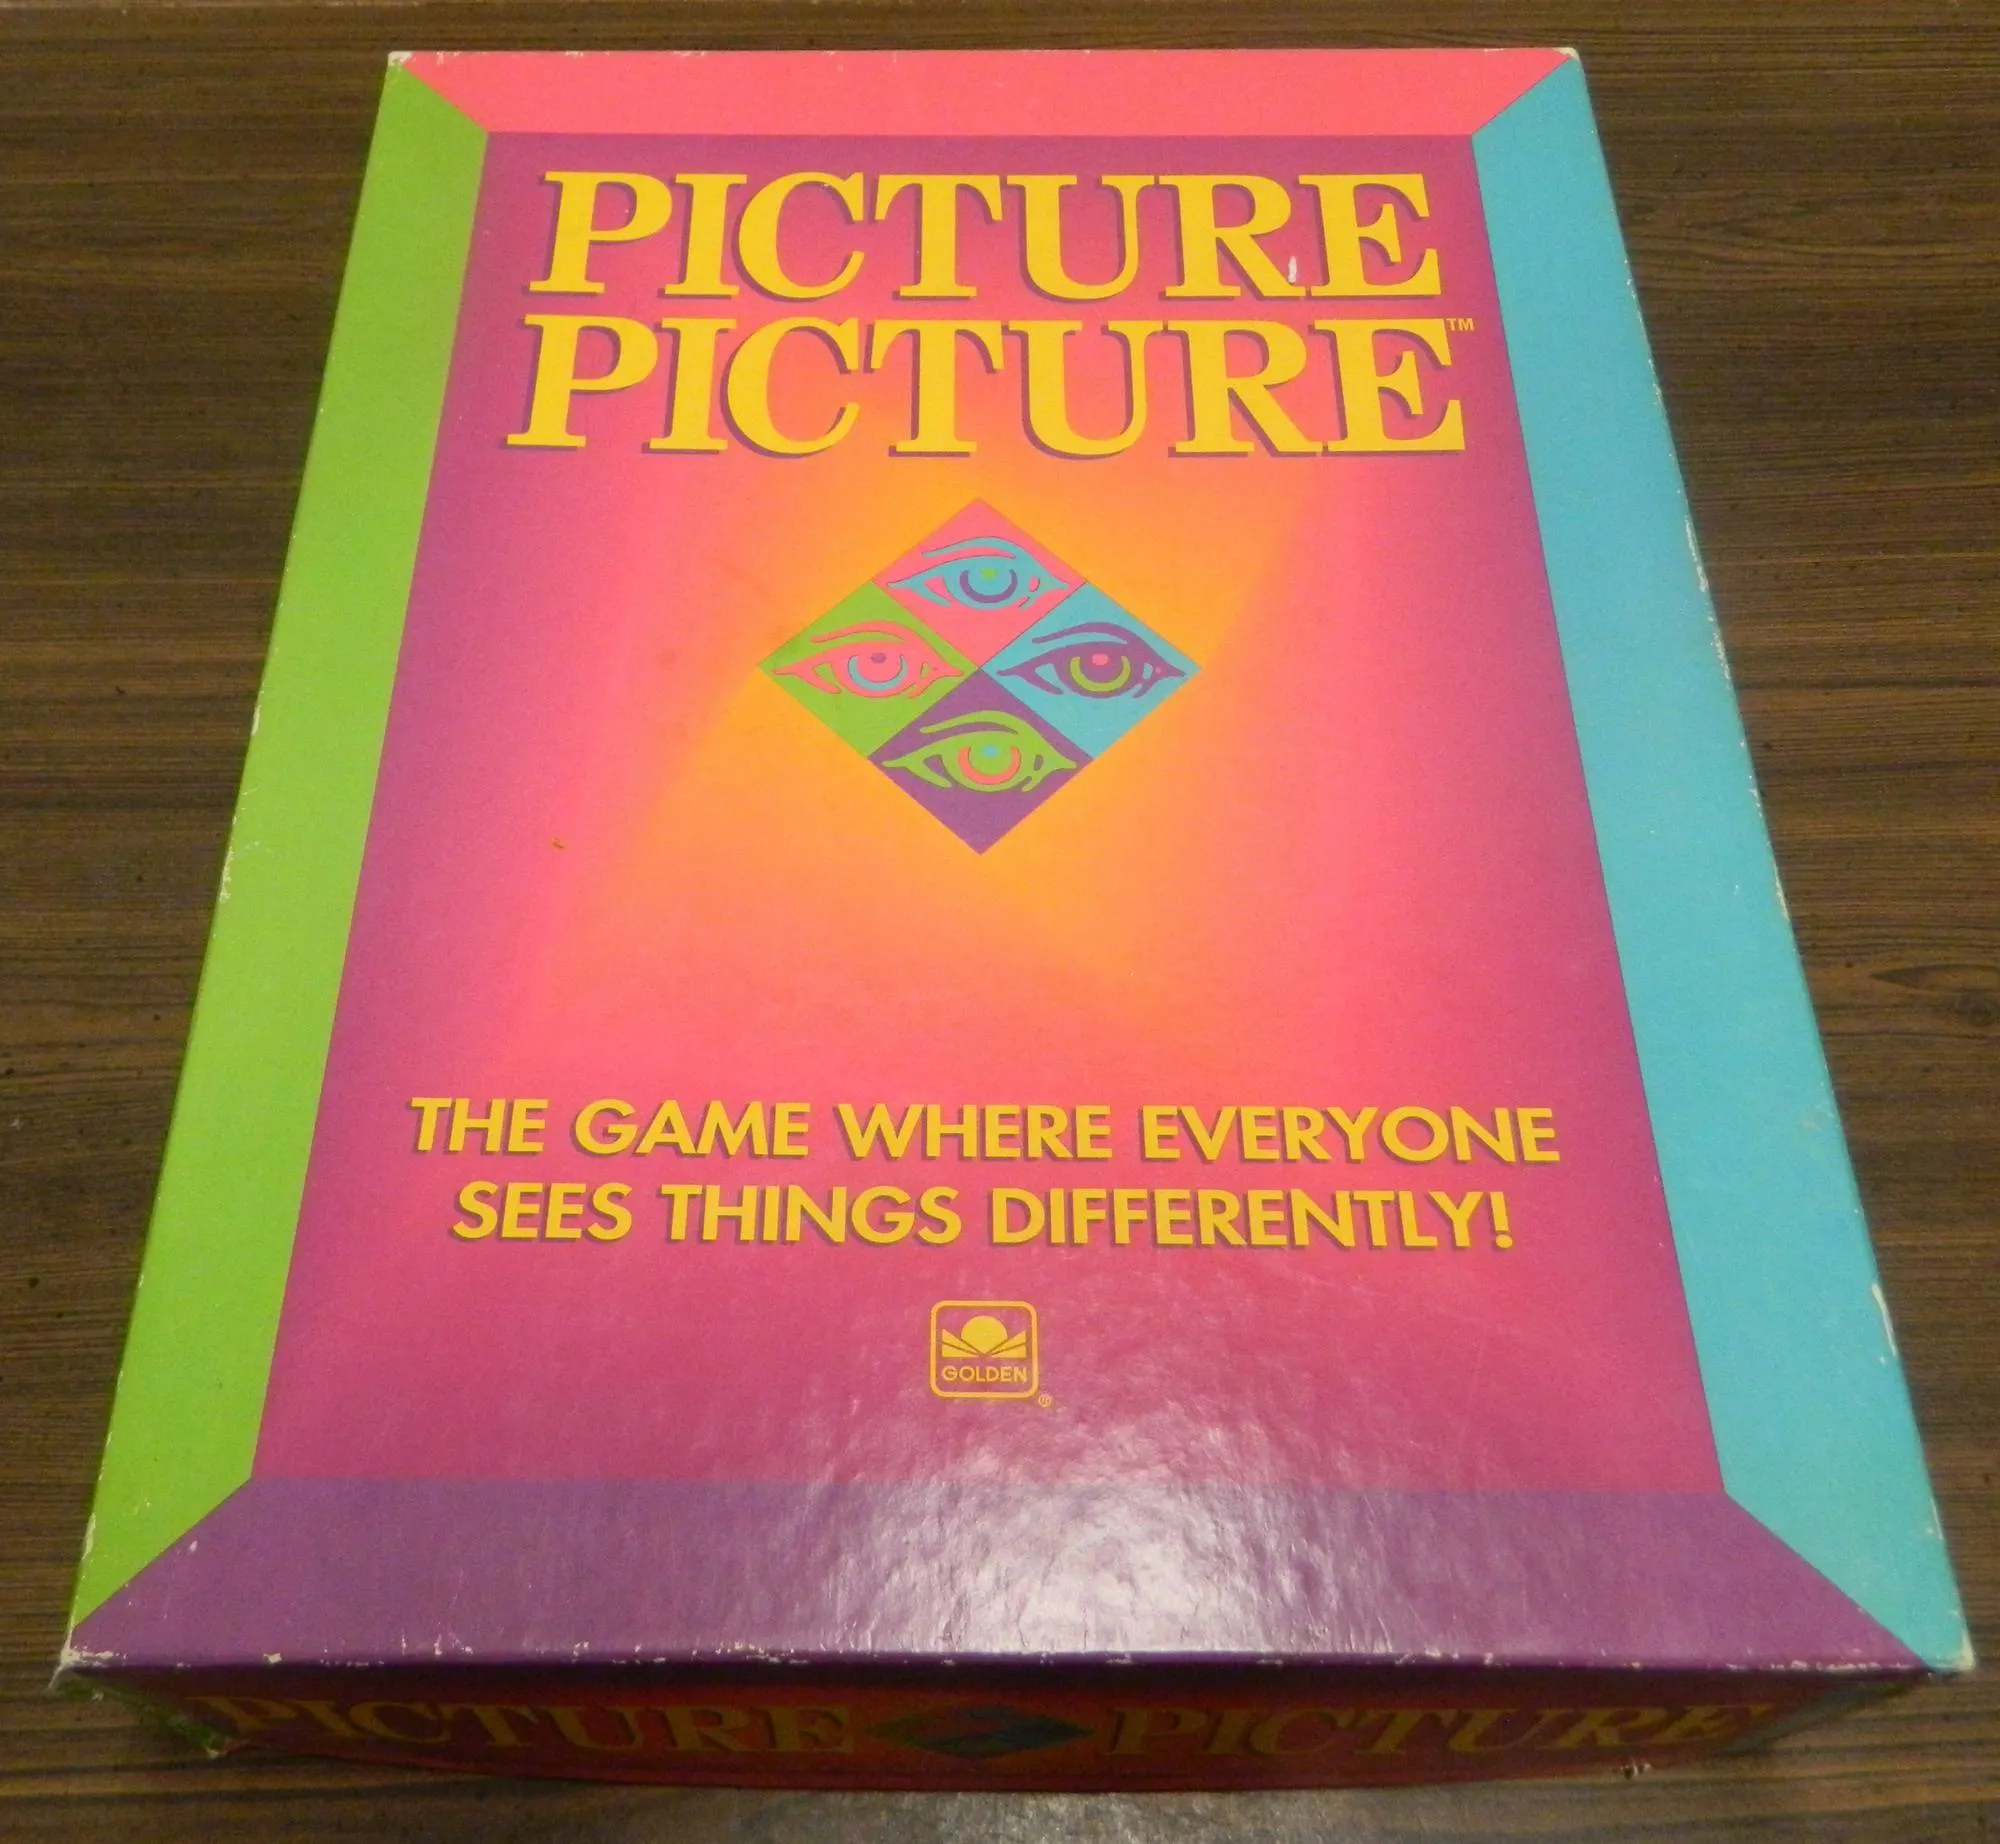 Box for Picture Picture